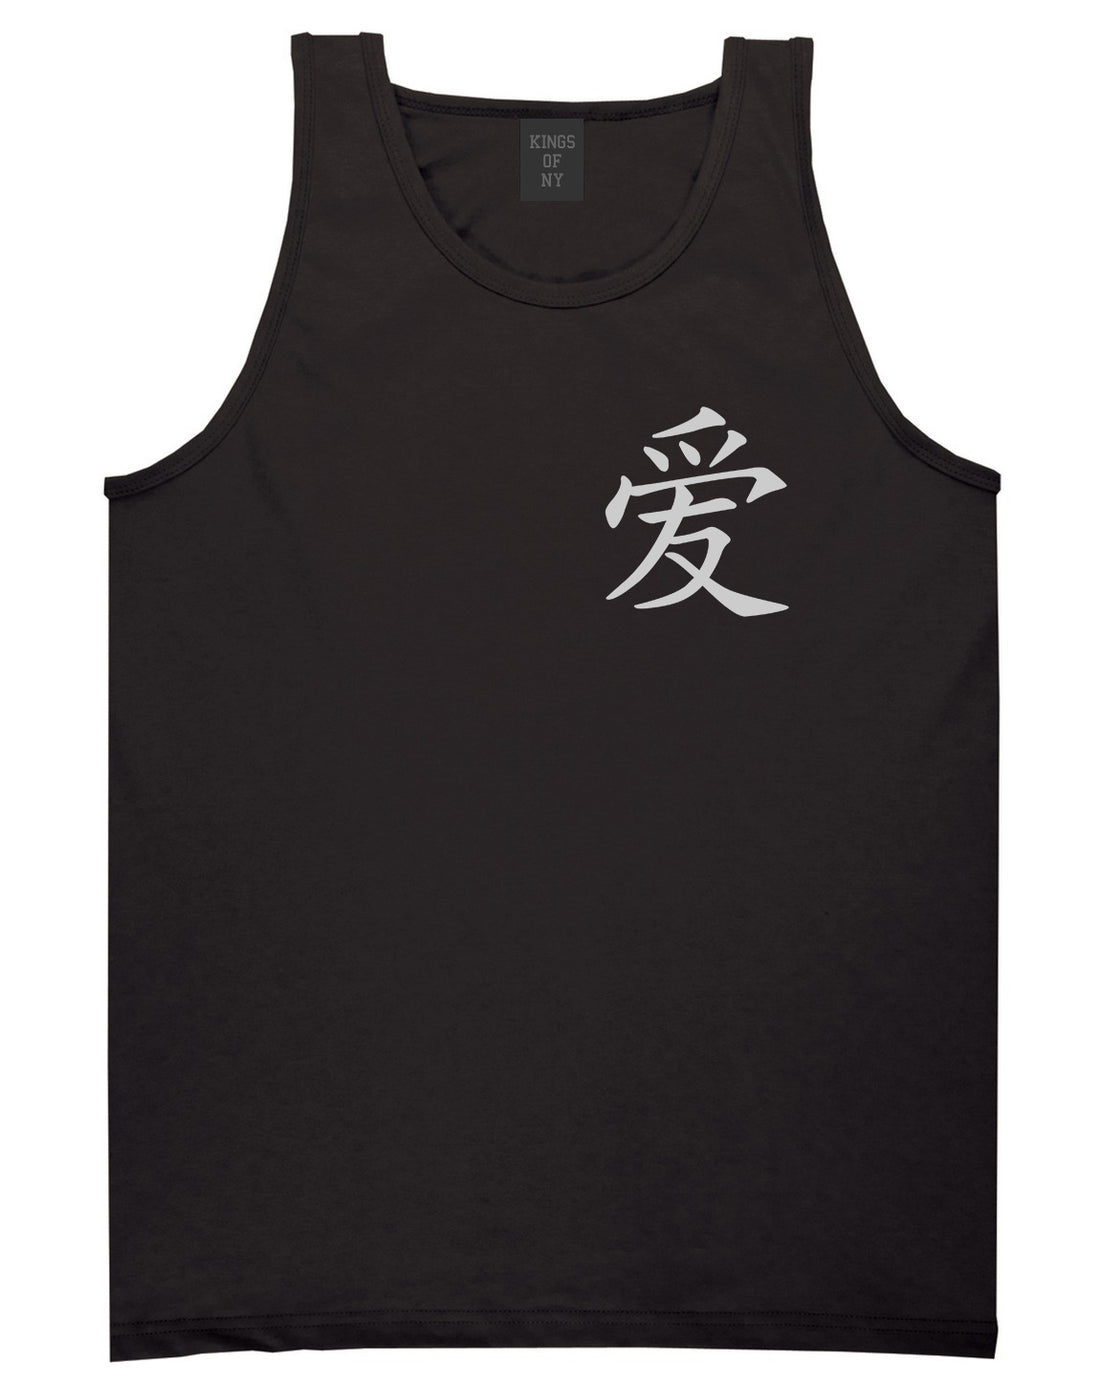 Chinese Symbol For Love Chest Black Tank Top Shirt by Kings Of NY